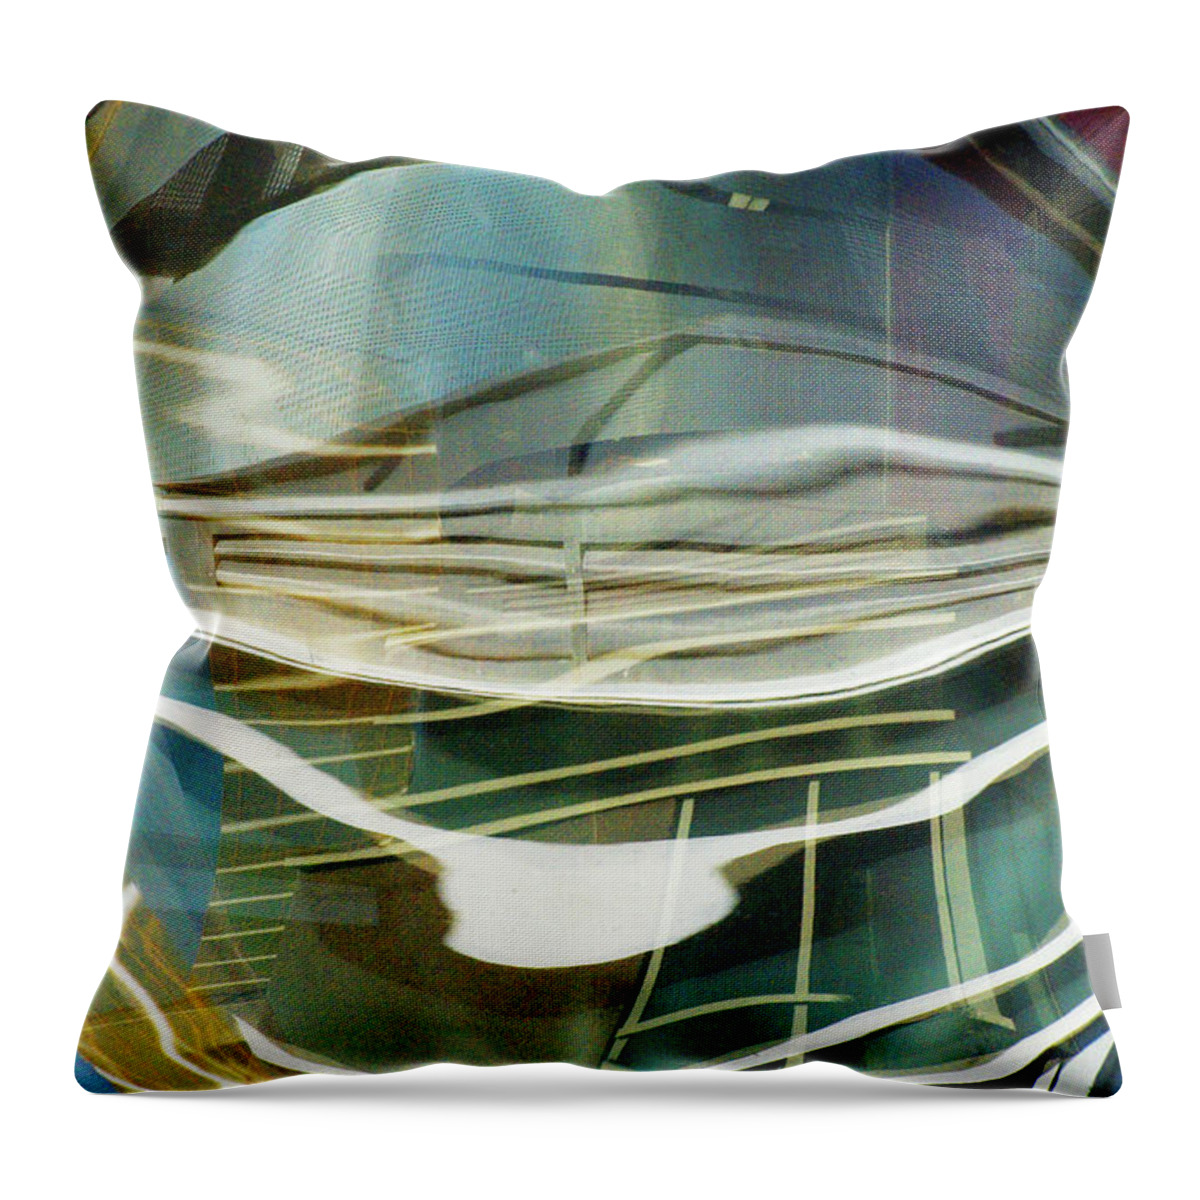 Warped Throw Pillow featuring the photograph Distorted Reflection by Richard Henne